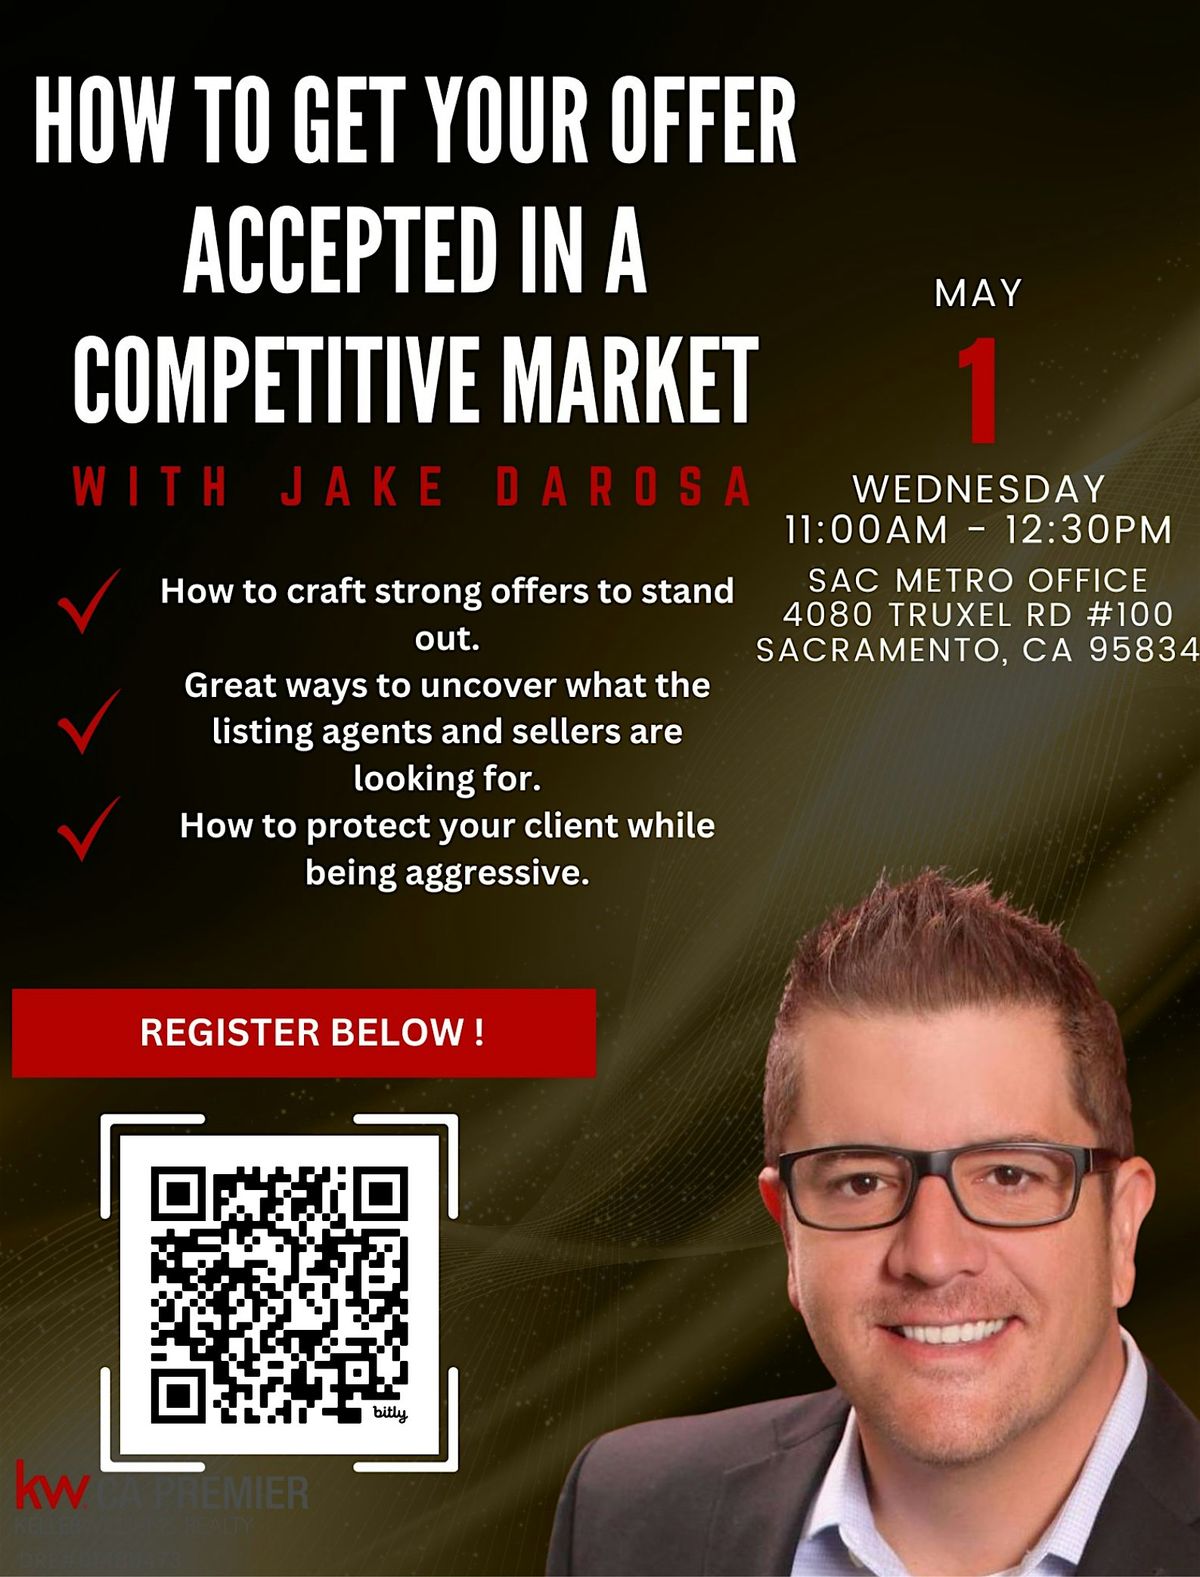 How To Get Your Offer Accepted in a Competitive Market